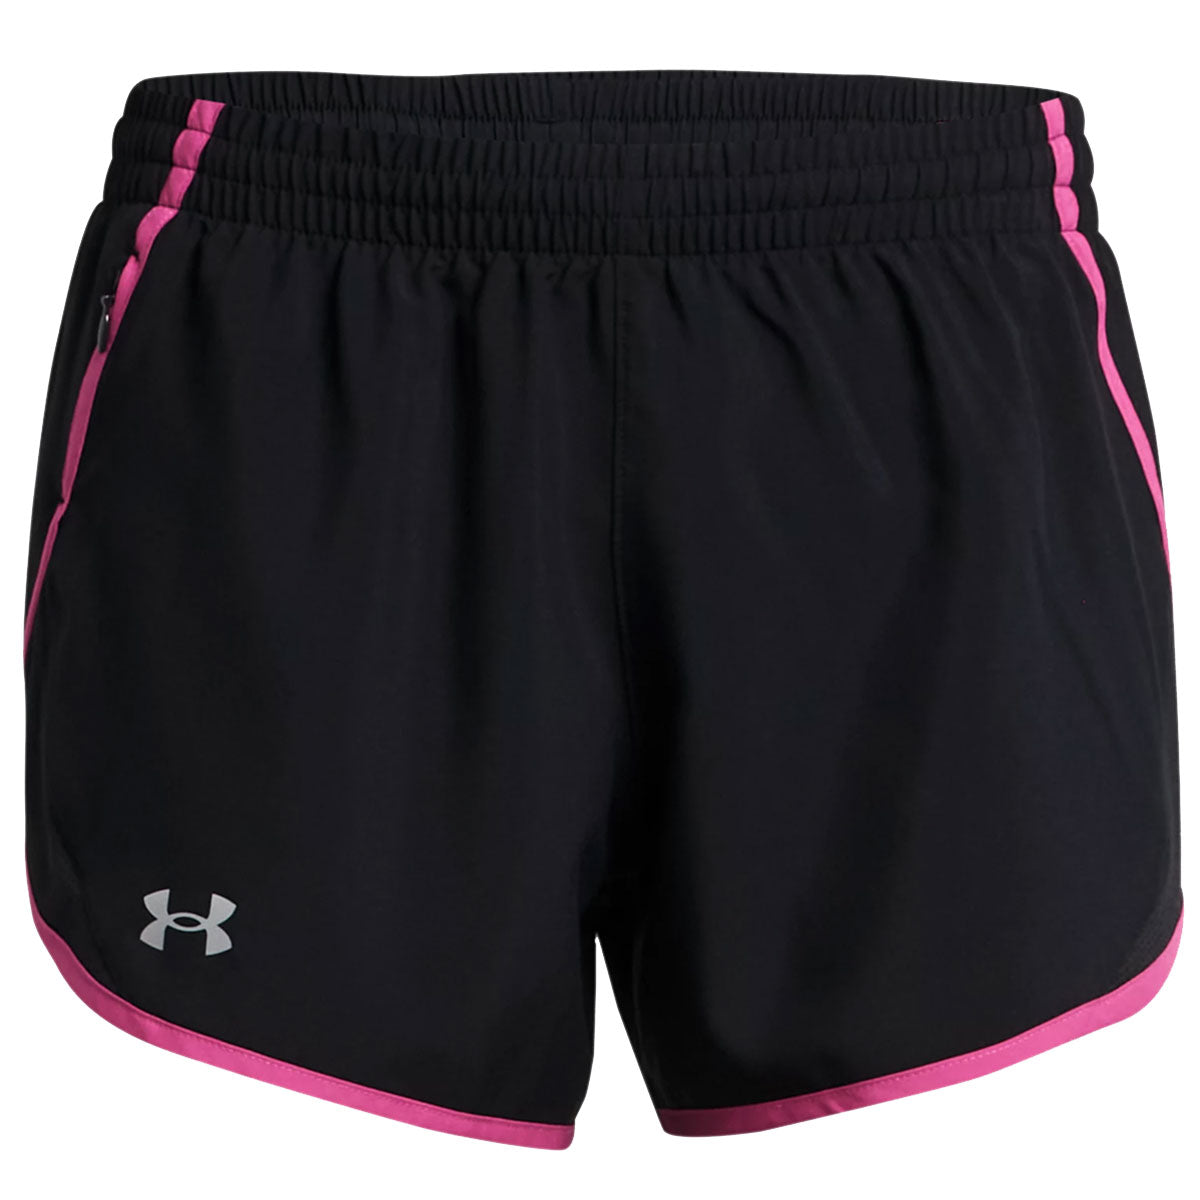 Under Armour Fly By Running Shorts - Womens - Black/Astro Pink/Reflective